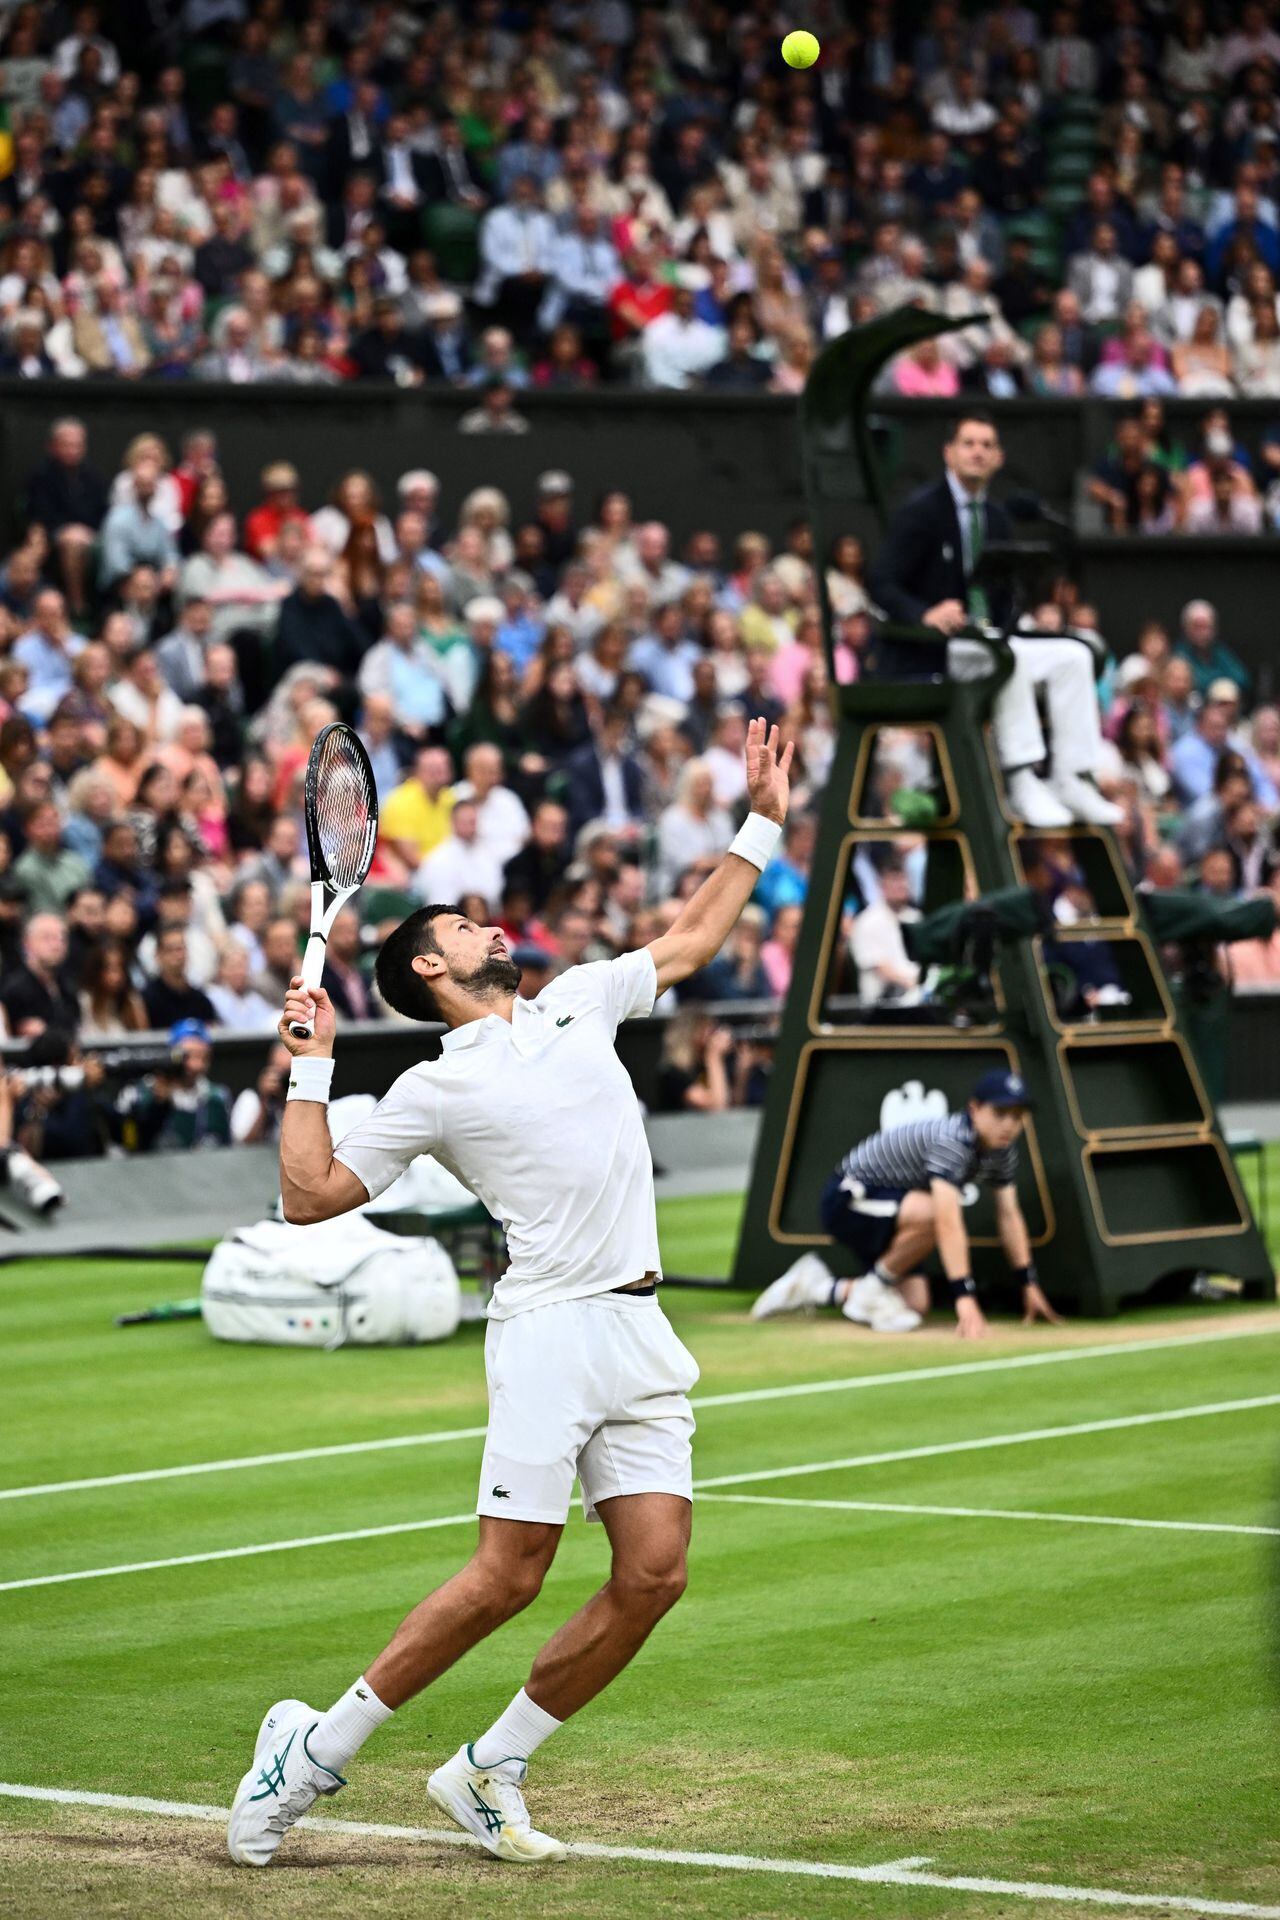 Serbia's Novak Djokovic serves the ball to Italy's Jannik Sinner during their men's singles semi-finals tennis match on the twelfth day of the 2023 Wimbledon Championships at The All England Lawn Tennis Club in Wimbledon, southwest London, on July 14, 2023. (Photo by SEBASTIEN BOZON / AFP) / RESTRICTED TO EDITORIAL USE